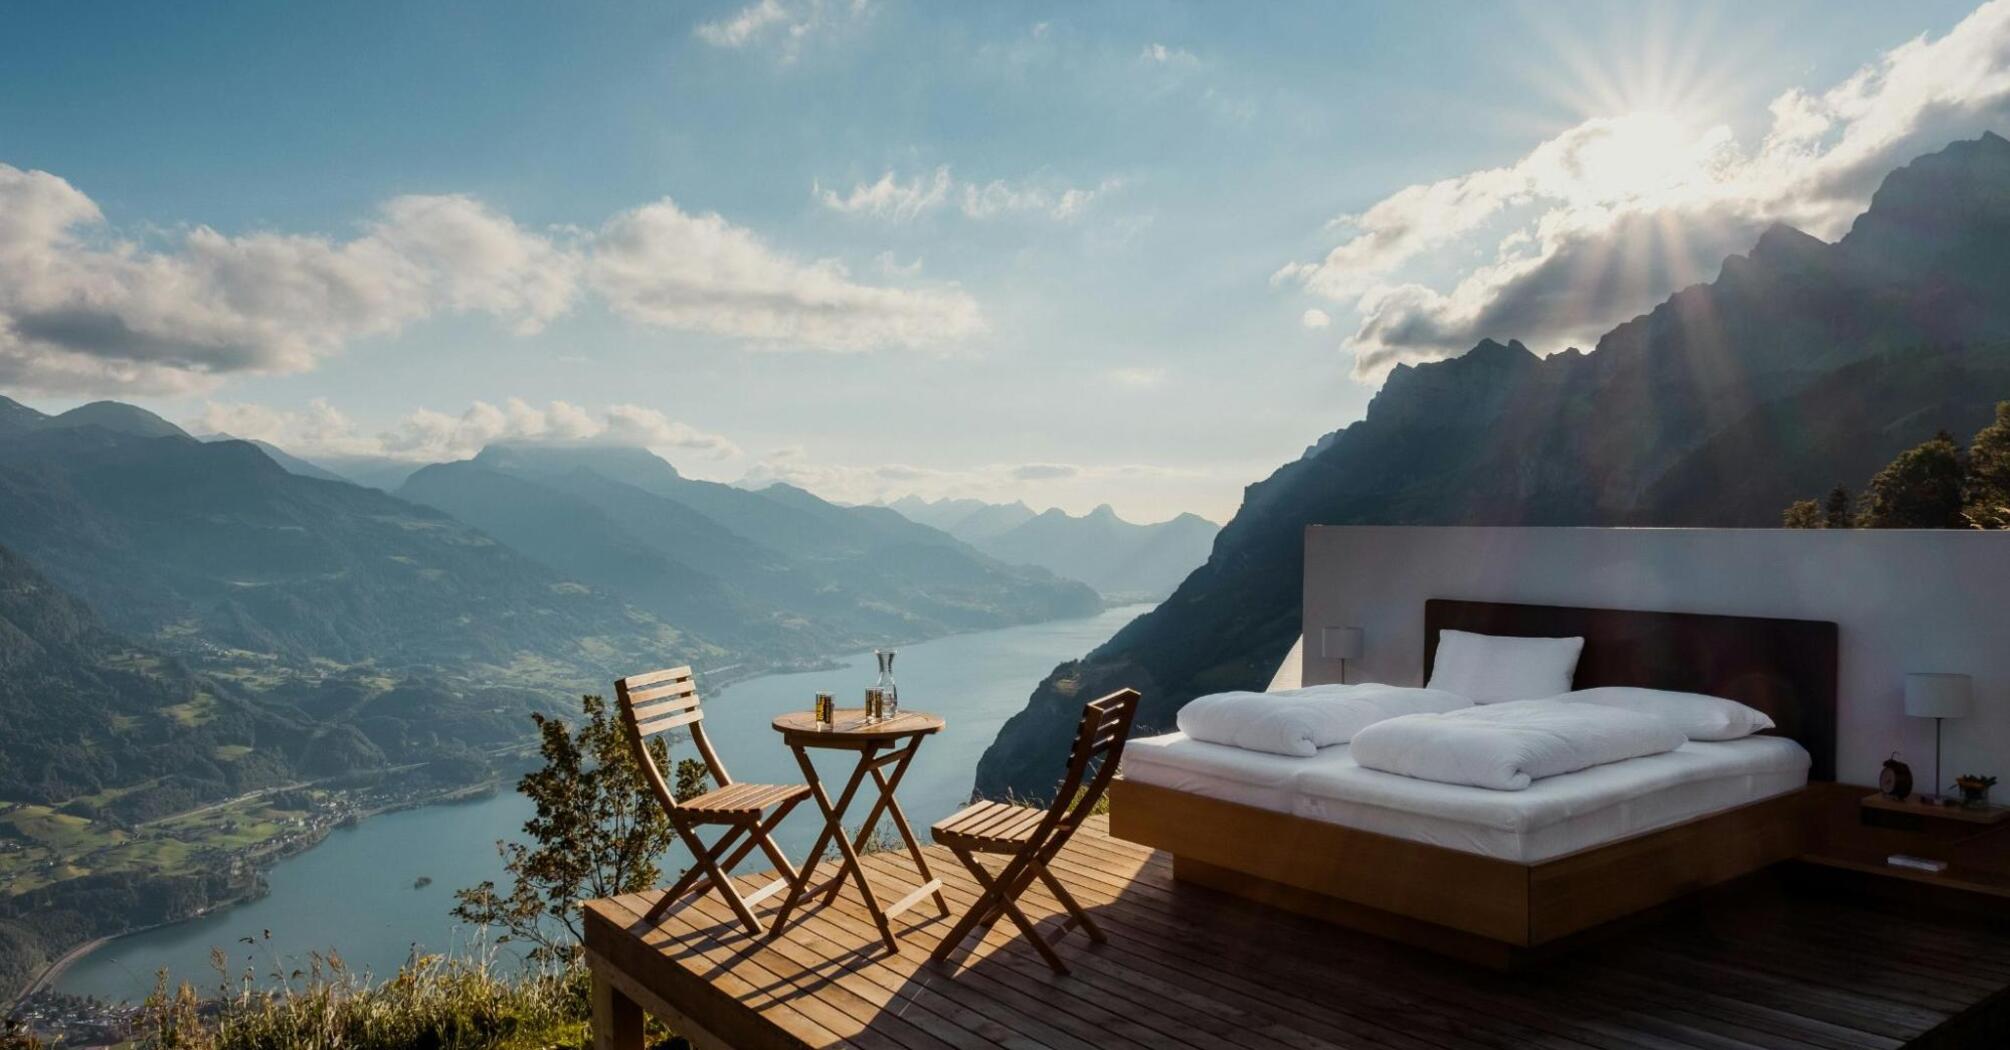 Sleeping bed located in a beautiful landscape